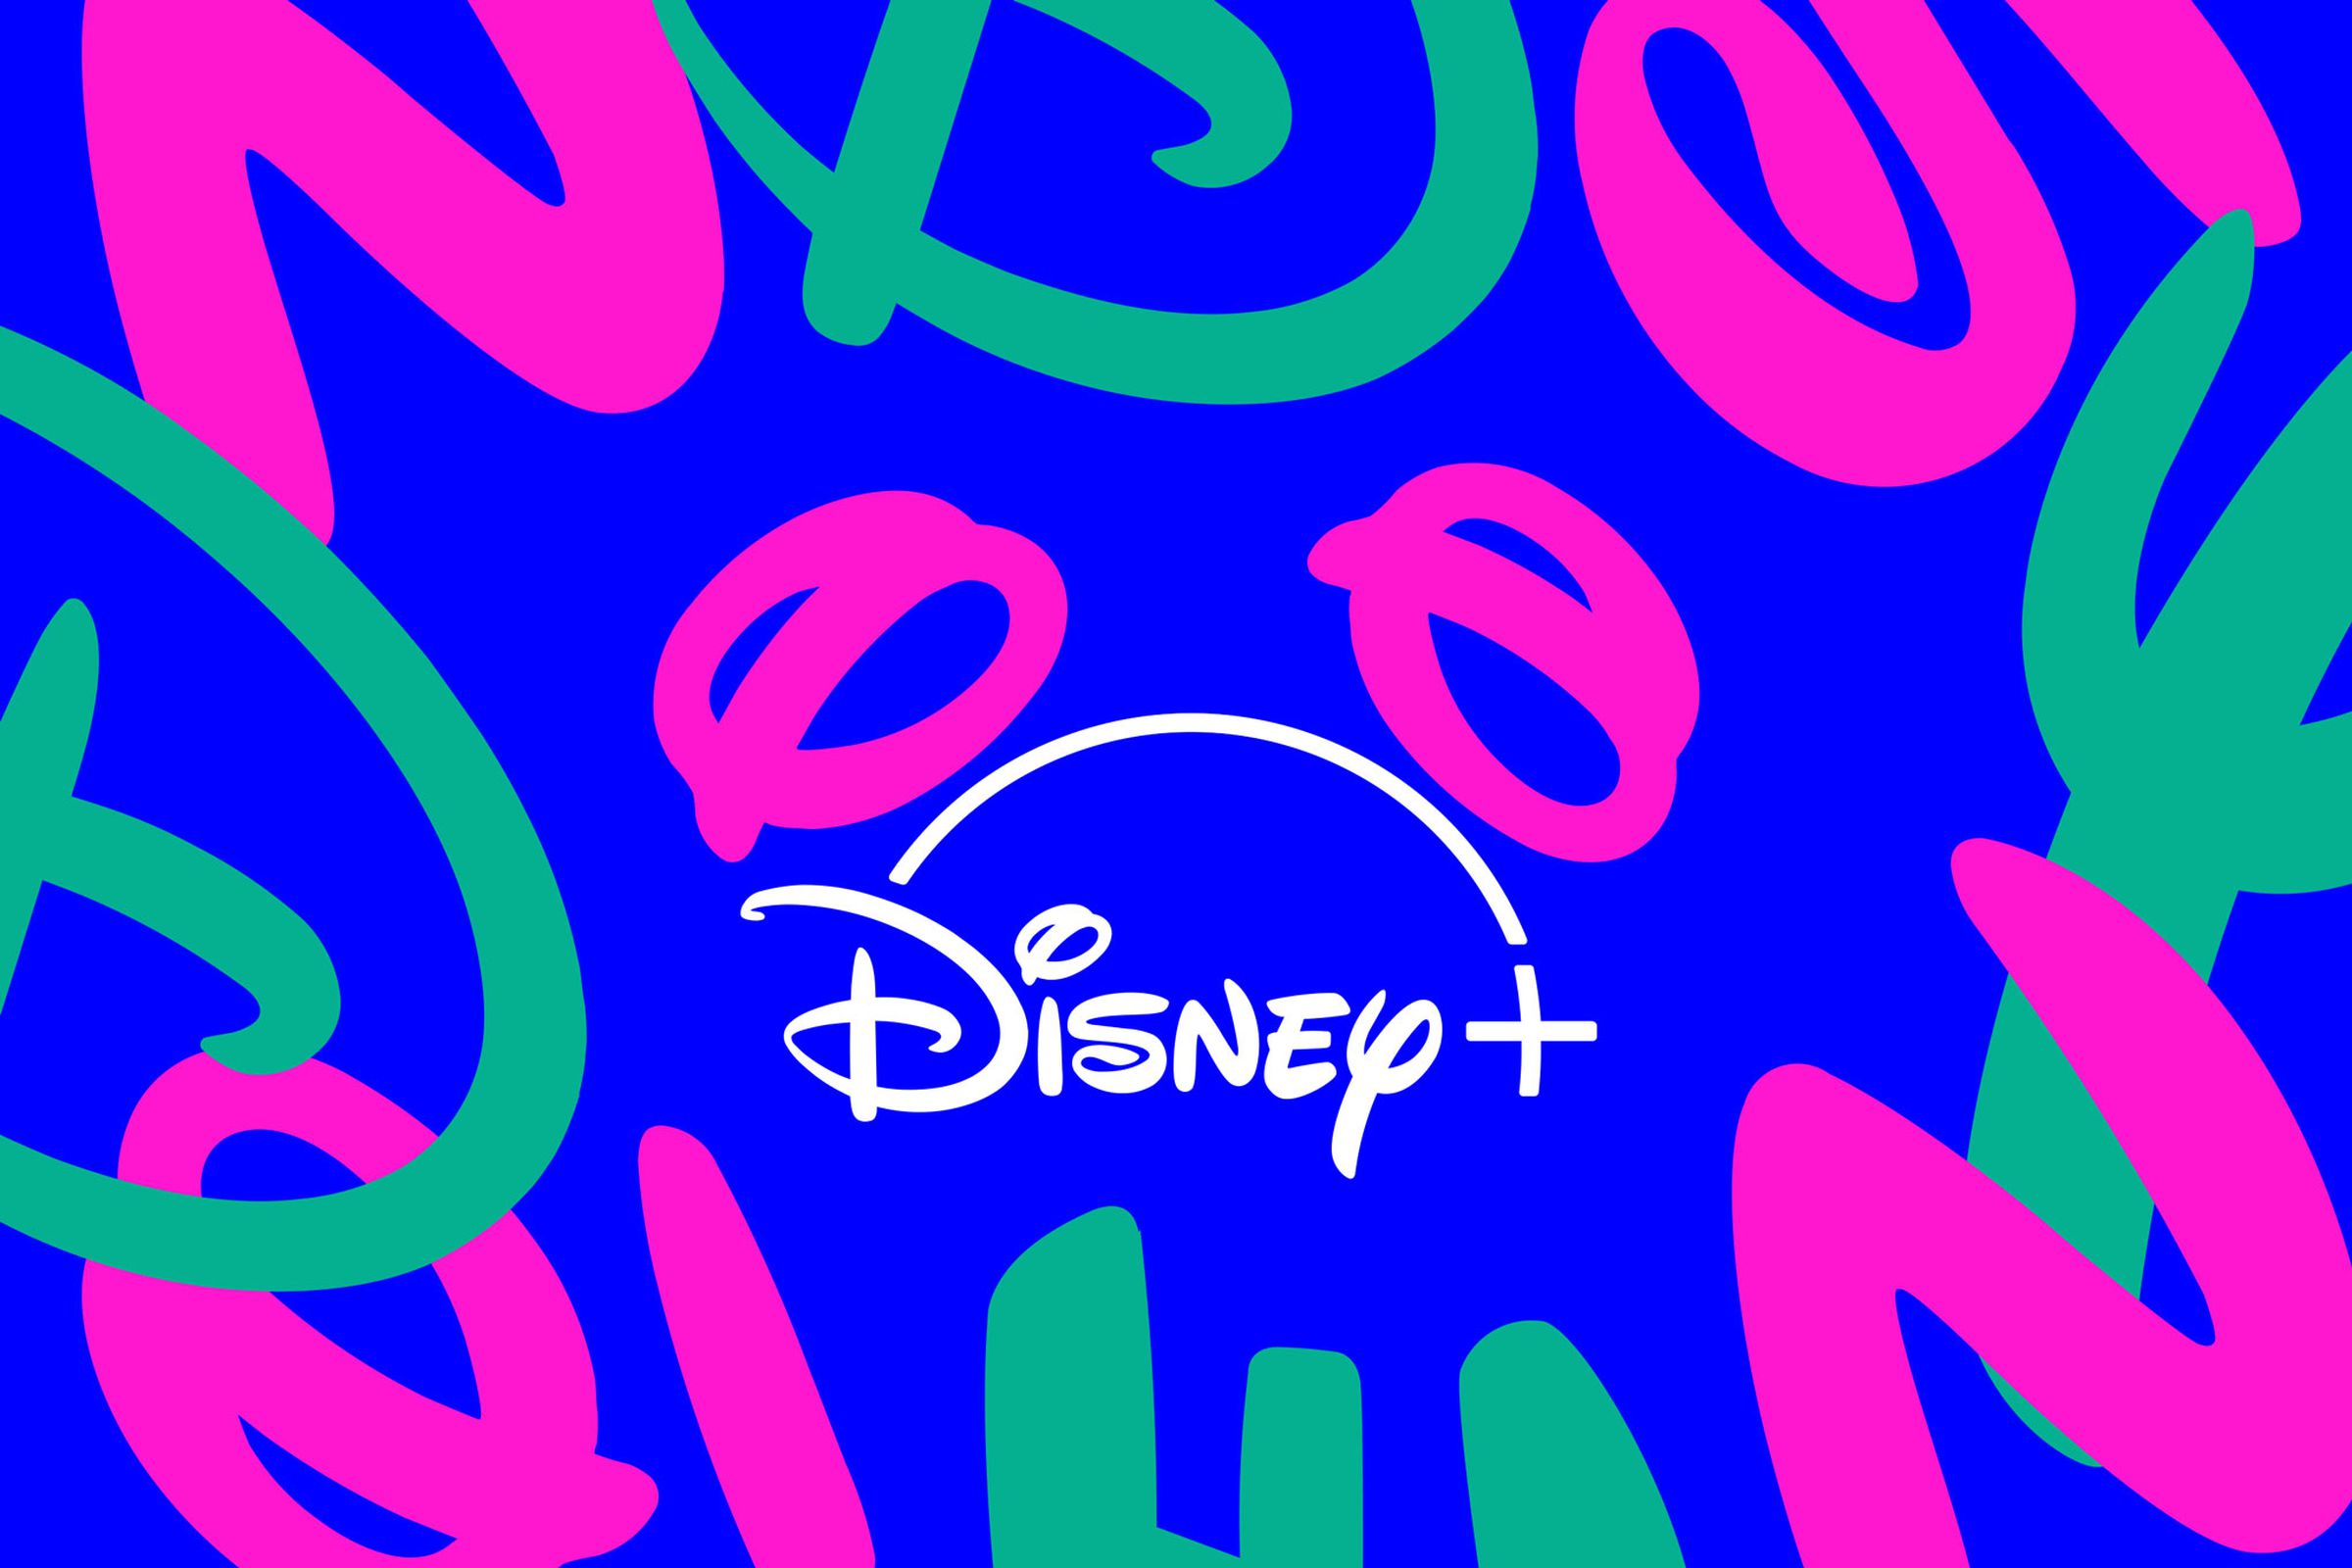 Disney Plus logo against a blue background with pink and green scribbles.